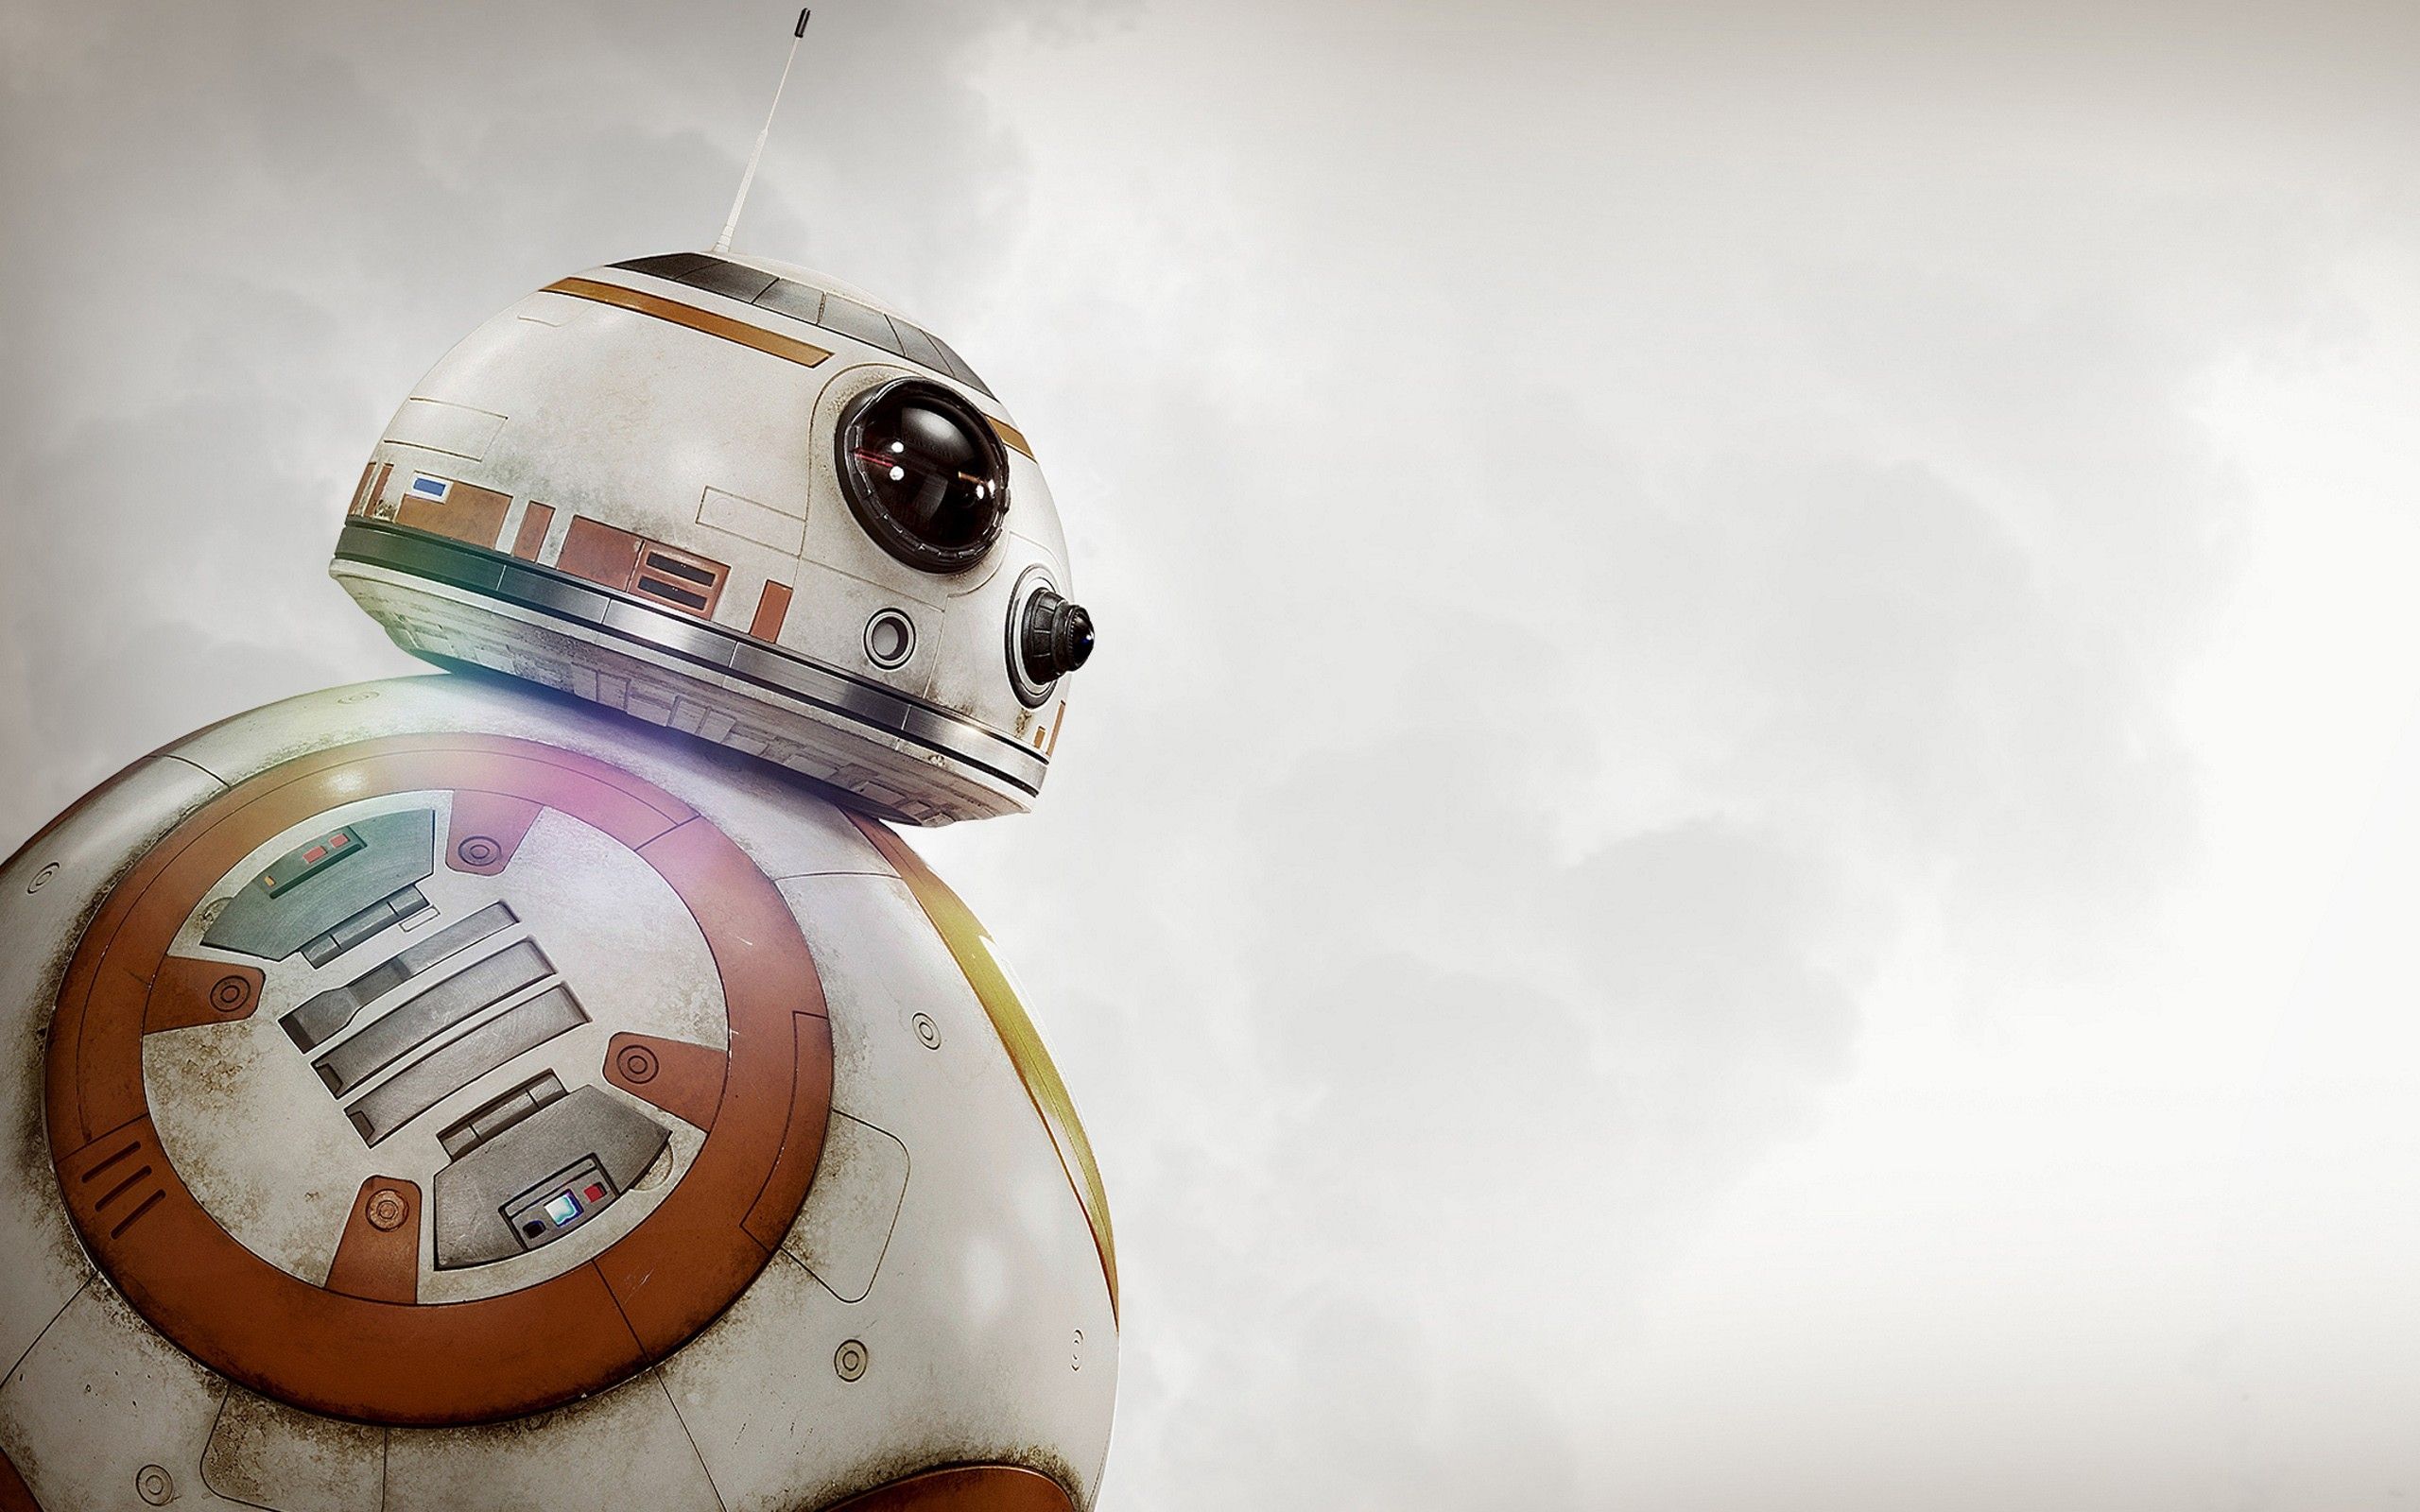 Star Wars The Force Awakens Robot Science Fiction BB 8 Star Wars Droids Movies Wallpaper:2560x1600